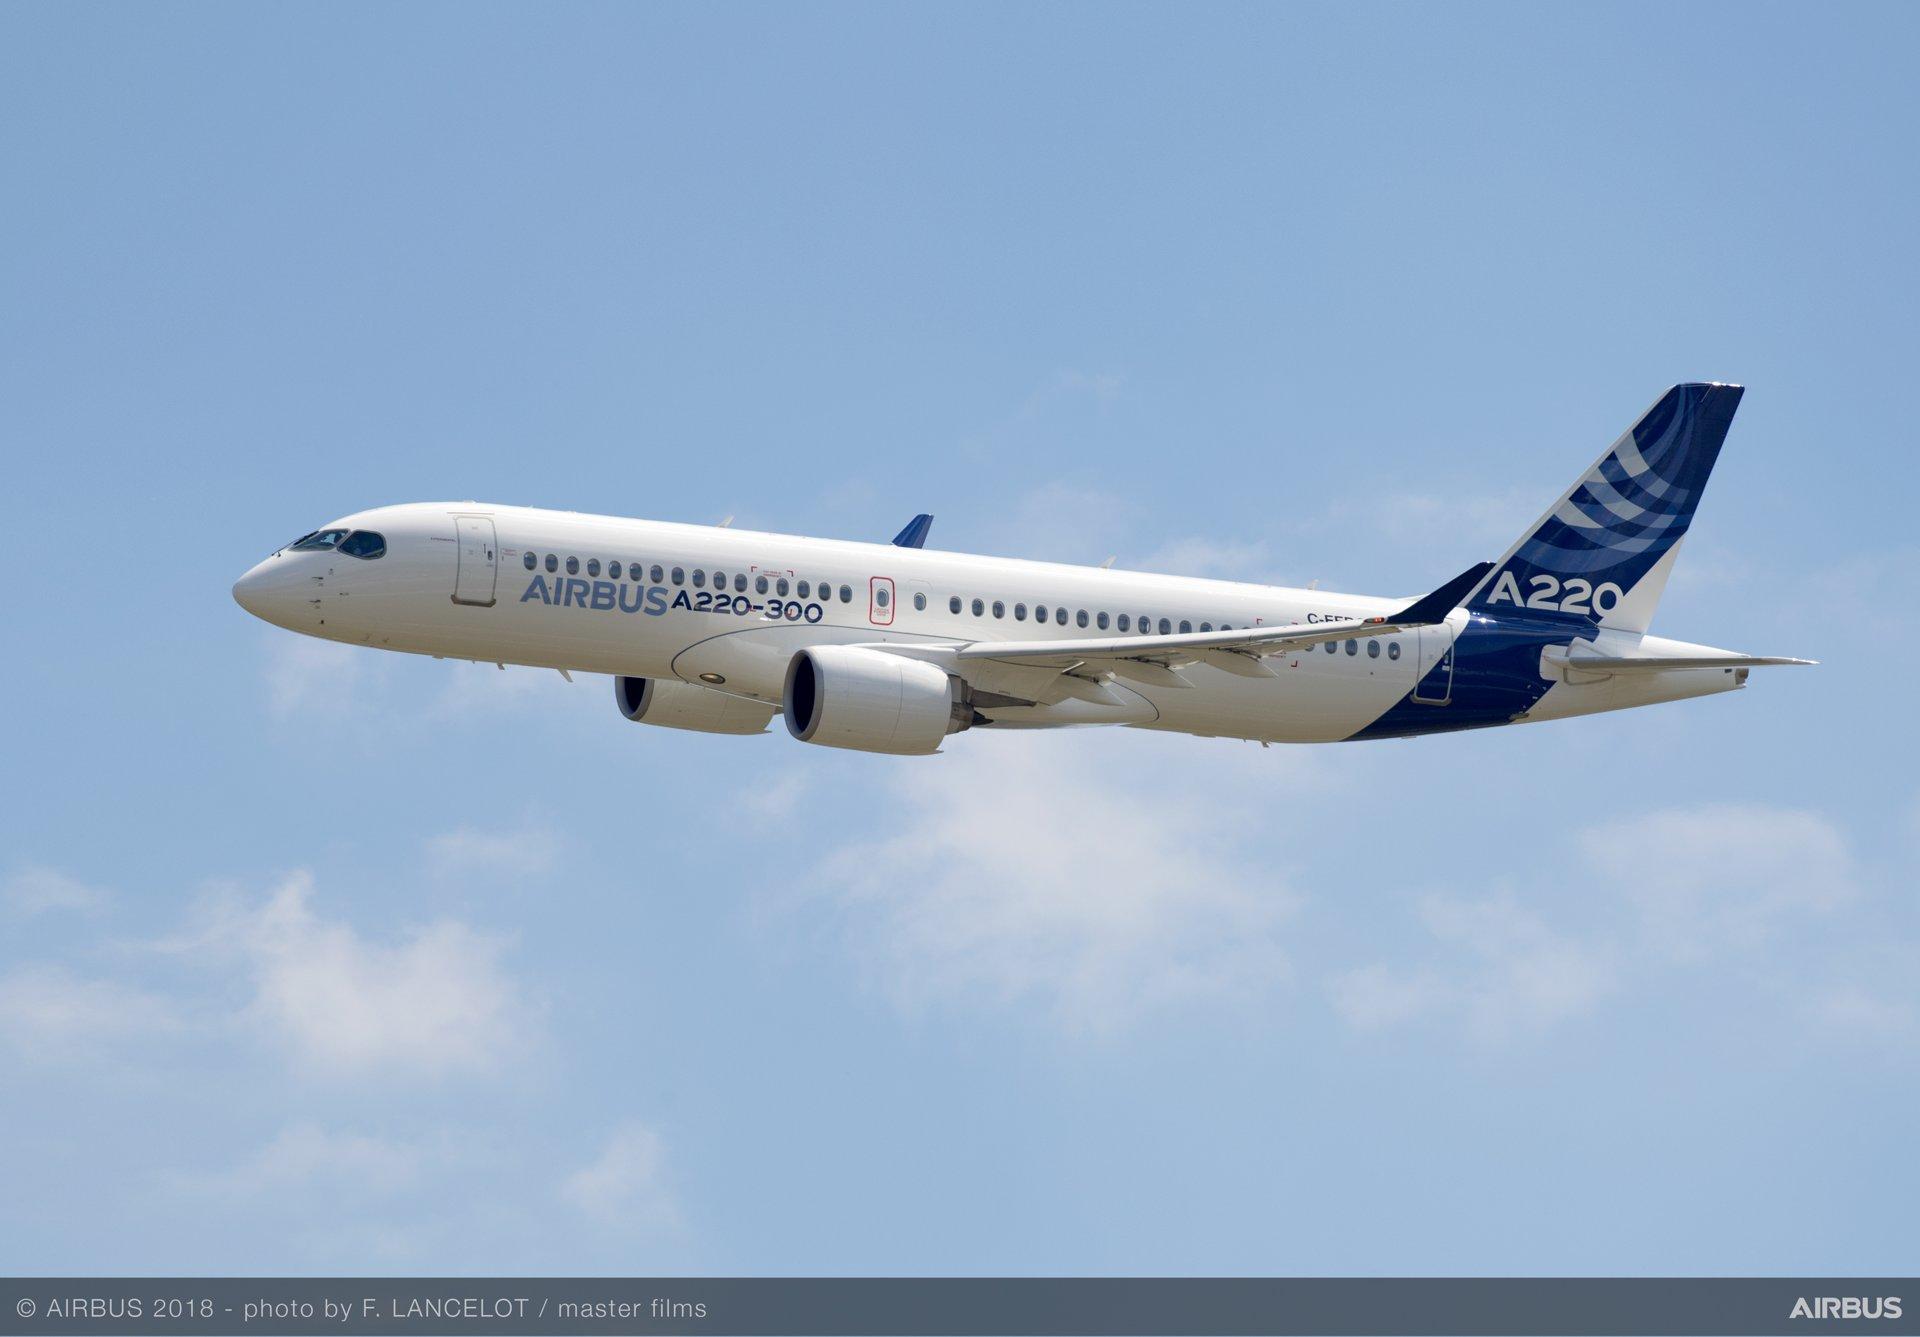 Airbus Introduces The A220 100 And A220 300